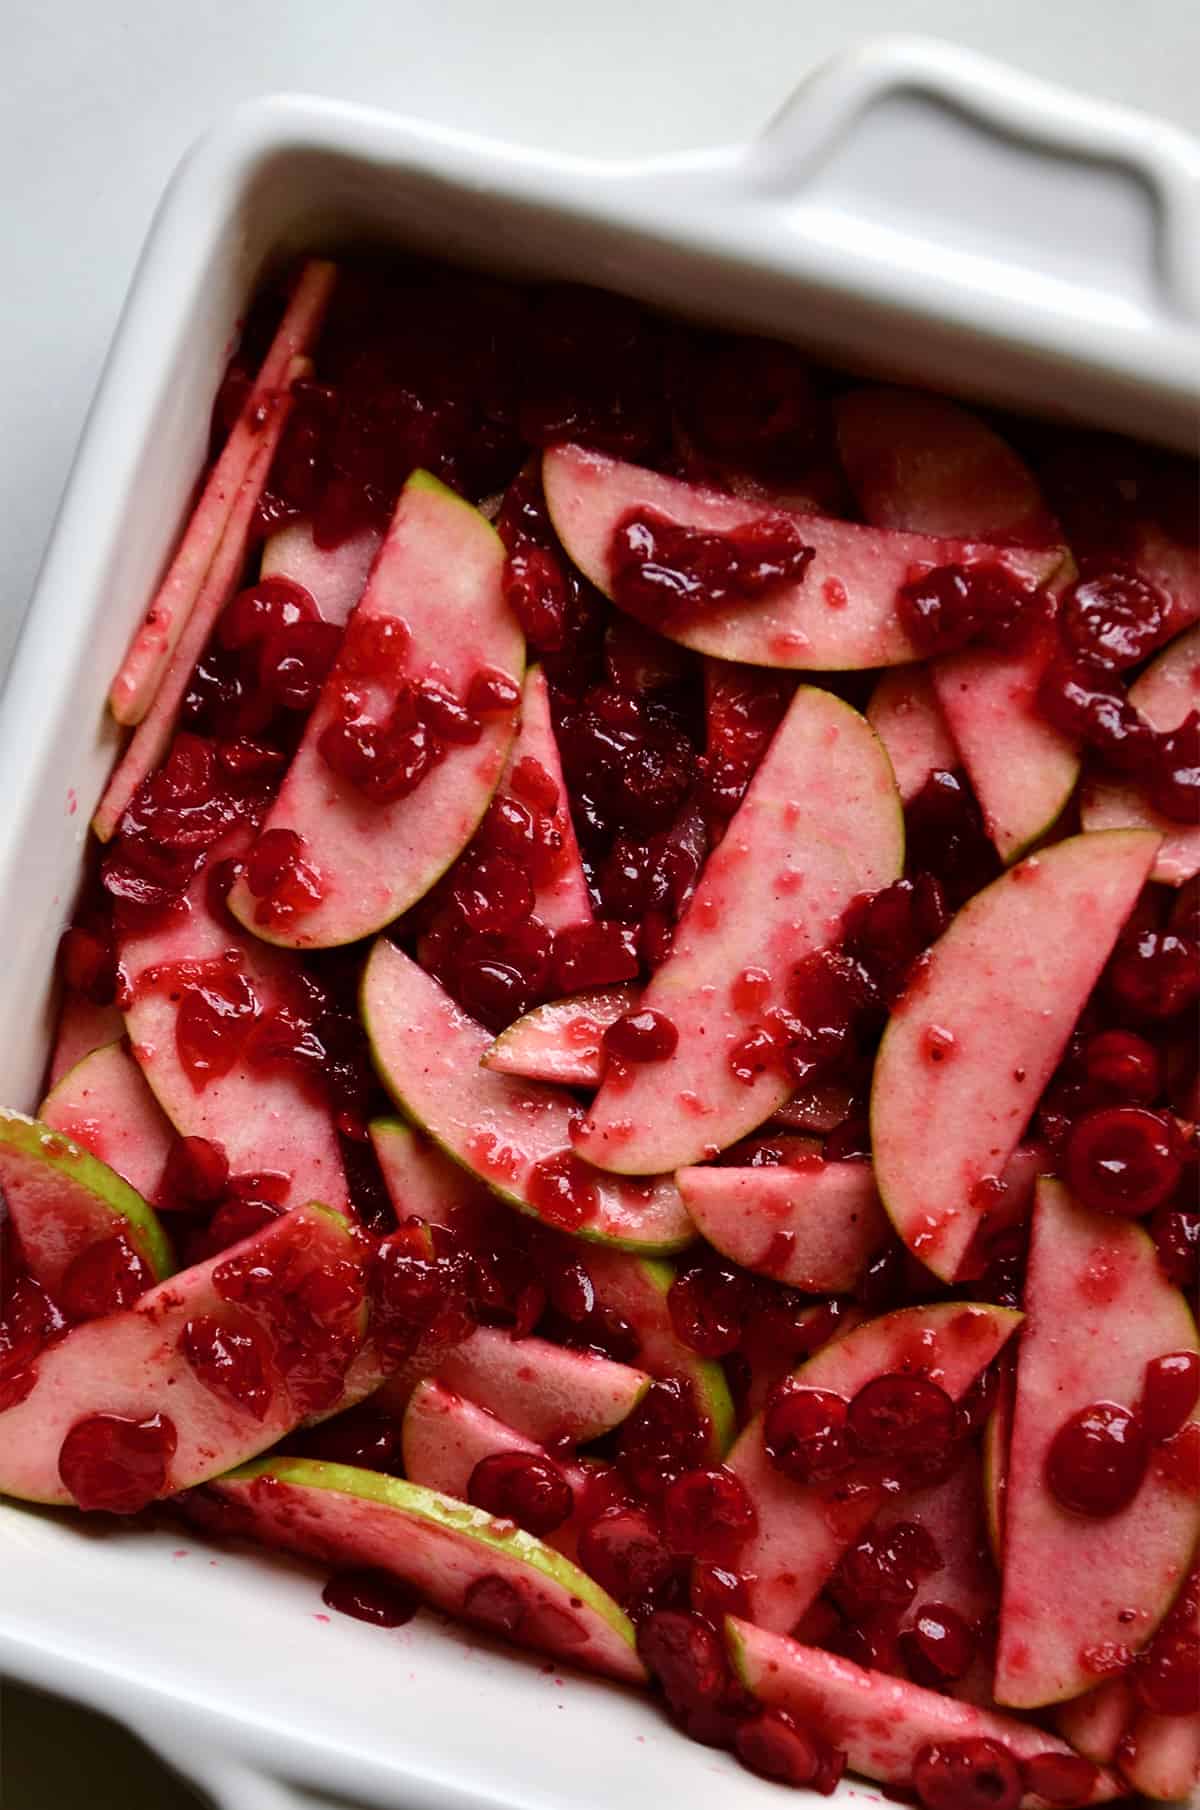 A baking dish containing apple slices and cranberry sauce.